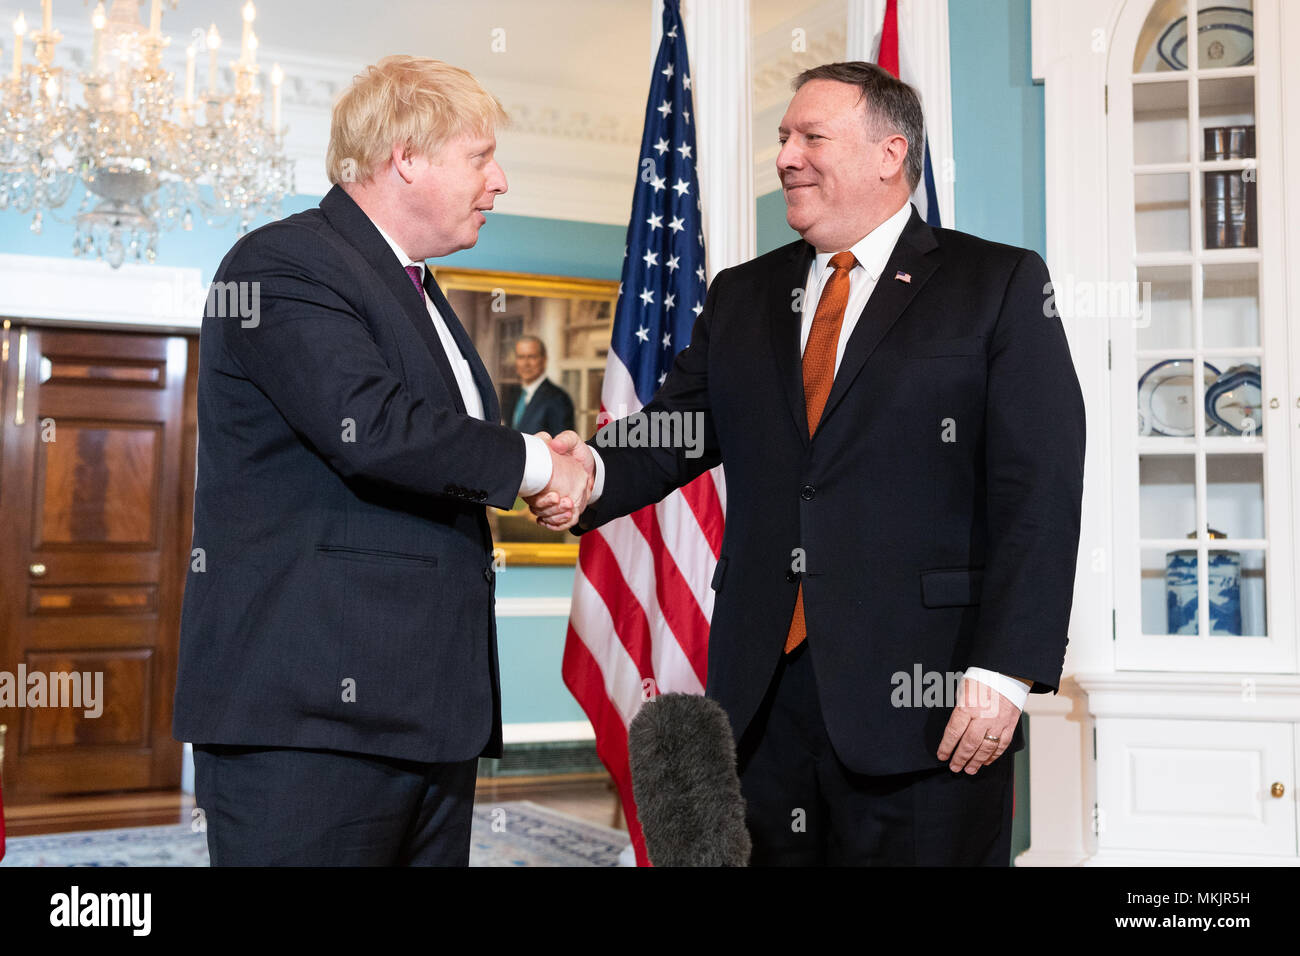 U.S. Secretary of State Mike Pompeo and UK Foreign Secretary Boris Johnson at the State Department in Washington, DC. Stock Photo